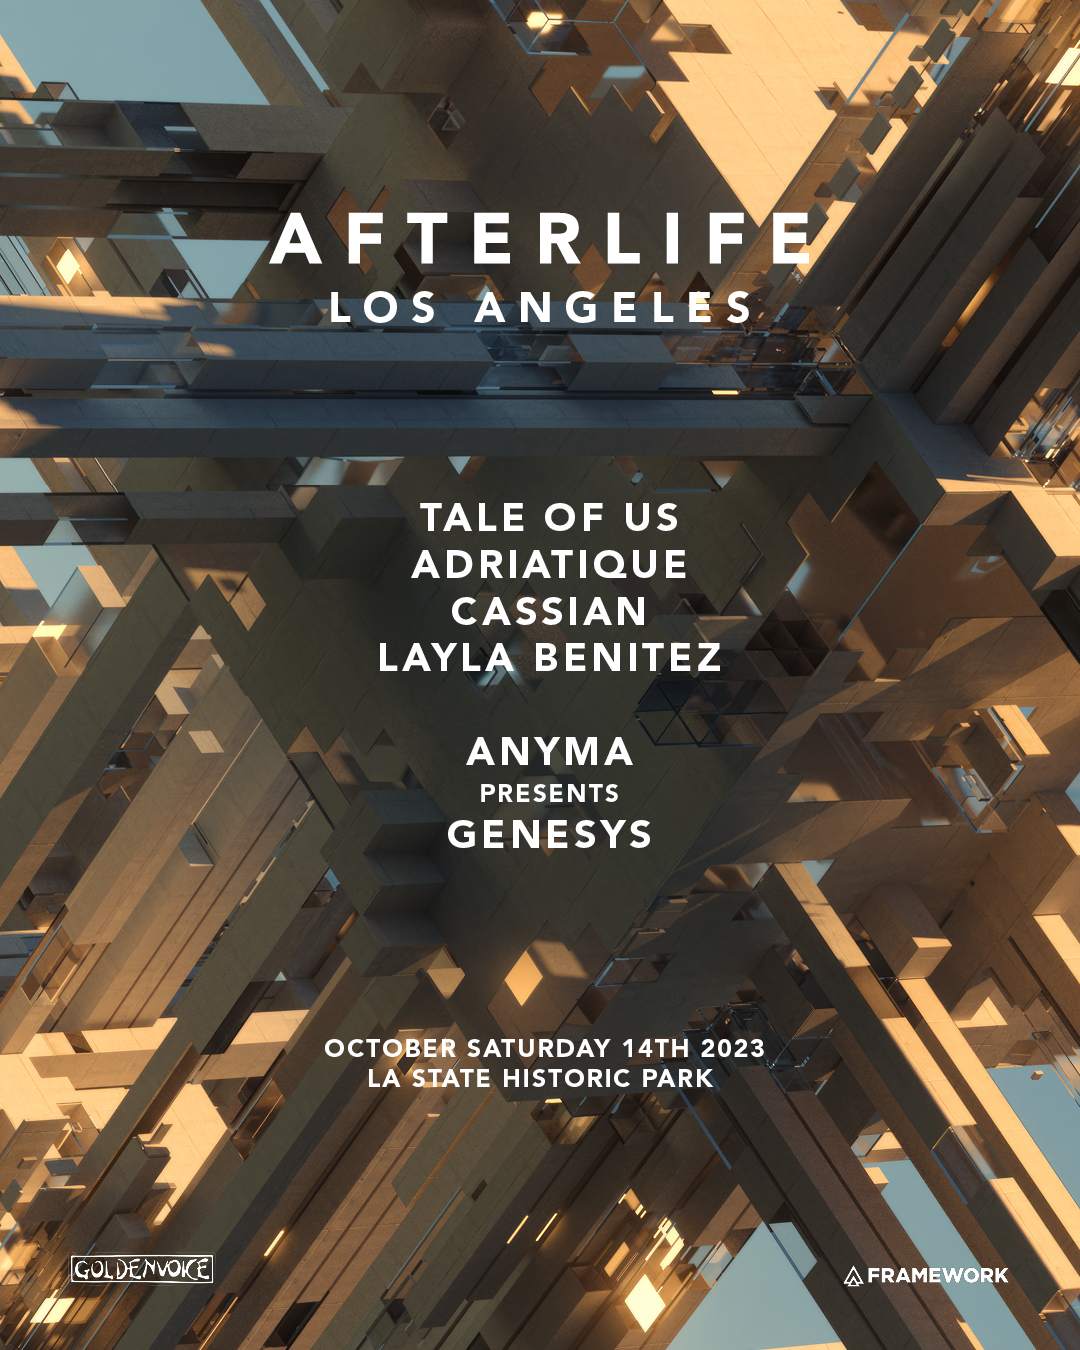 Afterlife Los Angeles 2023. Thank you for a transcendental weekend